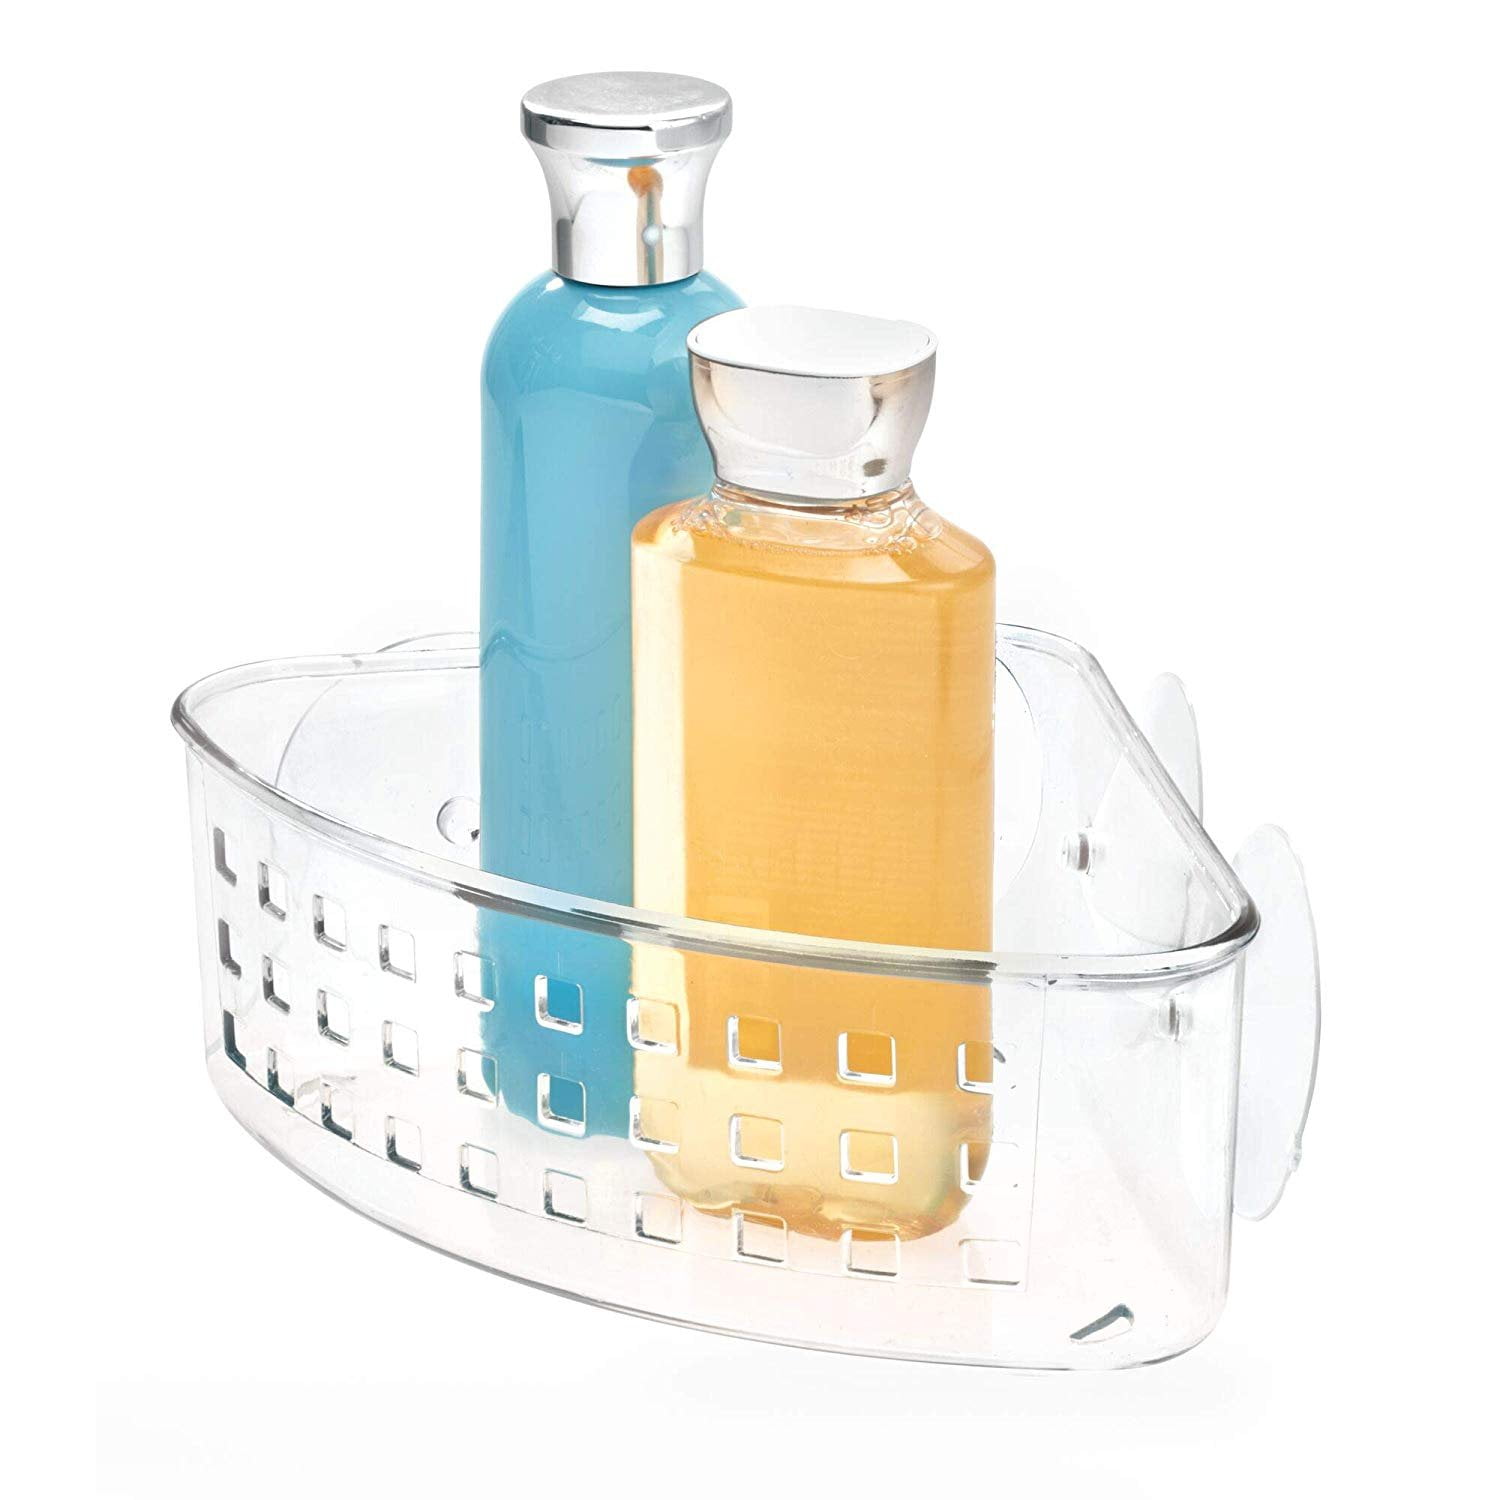 BUDGET & GOOD Corner Shower Caddy Suction Cup, Reusable Plastic Shower  Caddy Holds up to 22LB, Shower Corner Shelf for Shampoo Conditioner, Wa